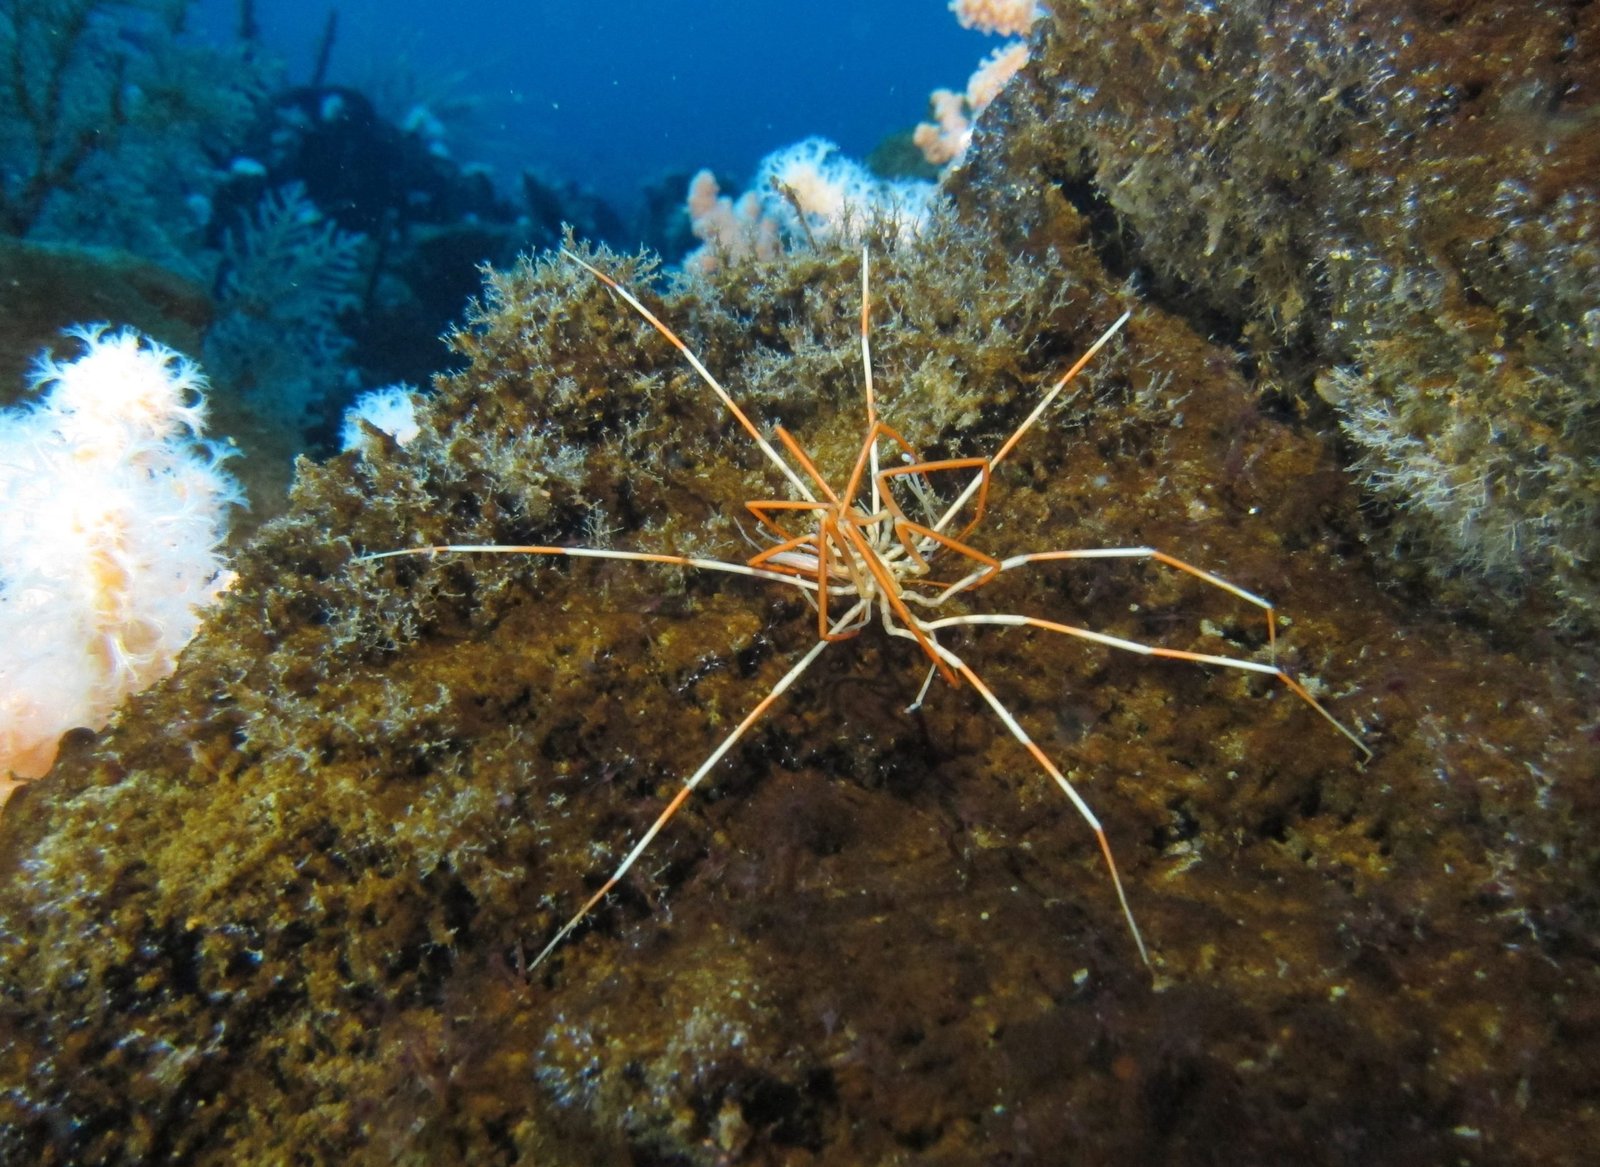 Scientists Solve 140-Year-Old Giant Antarctic Sea Spider Reproductive Mystery